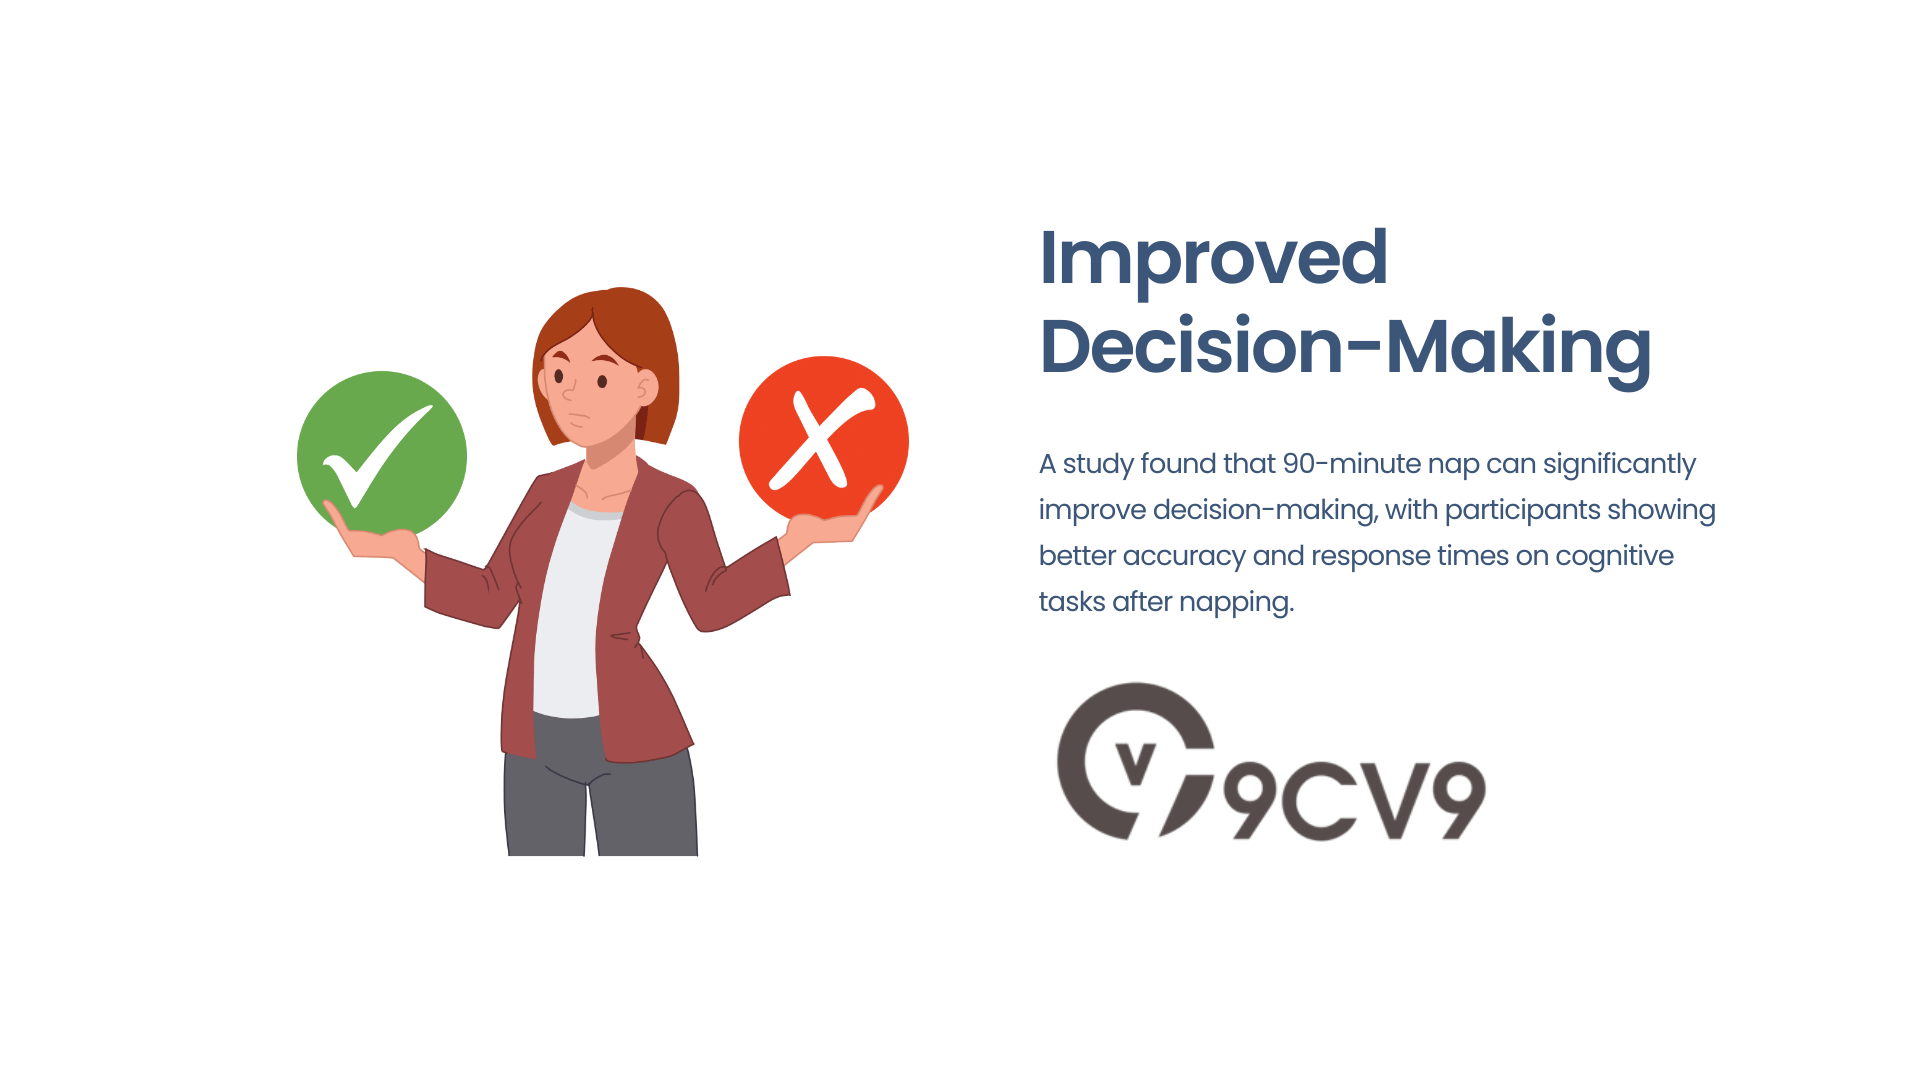 Improved Decision-Making